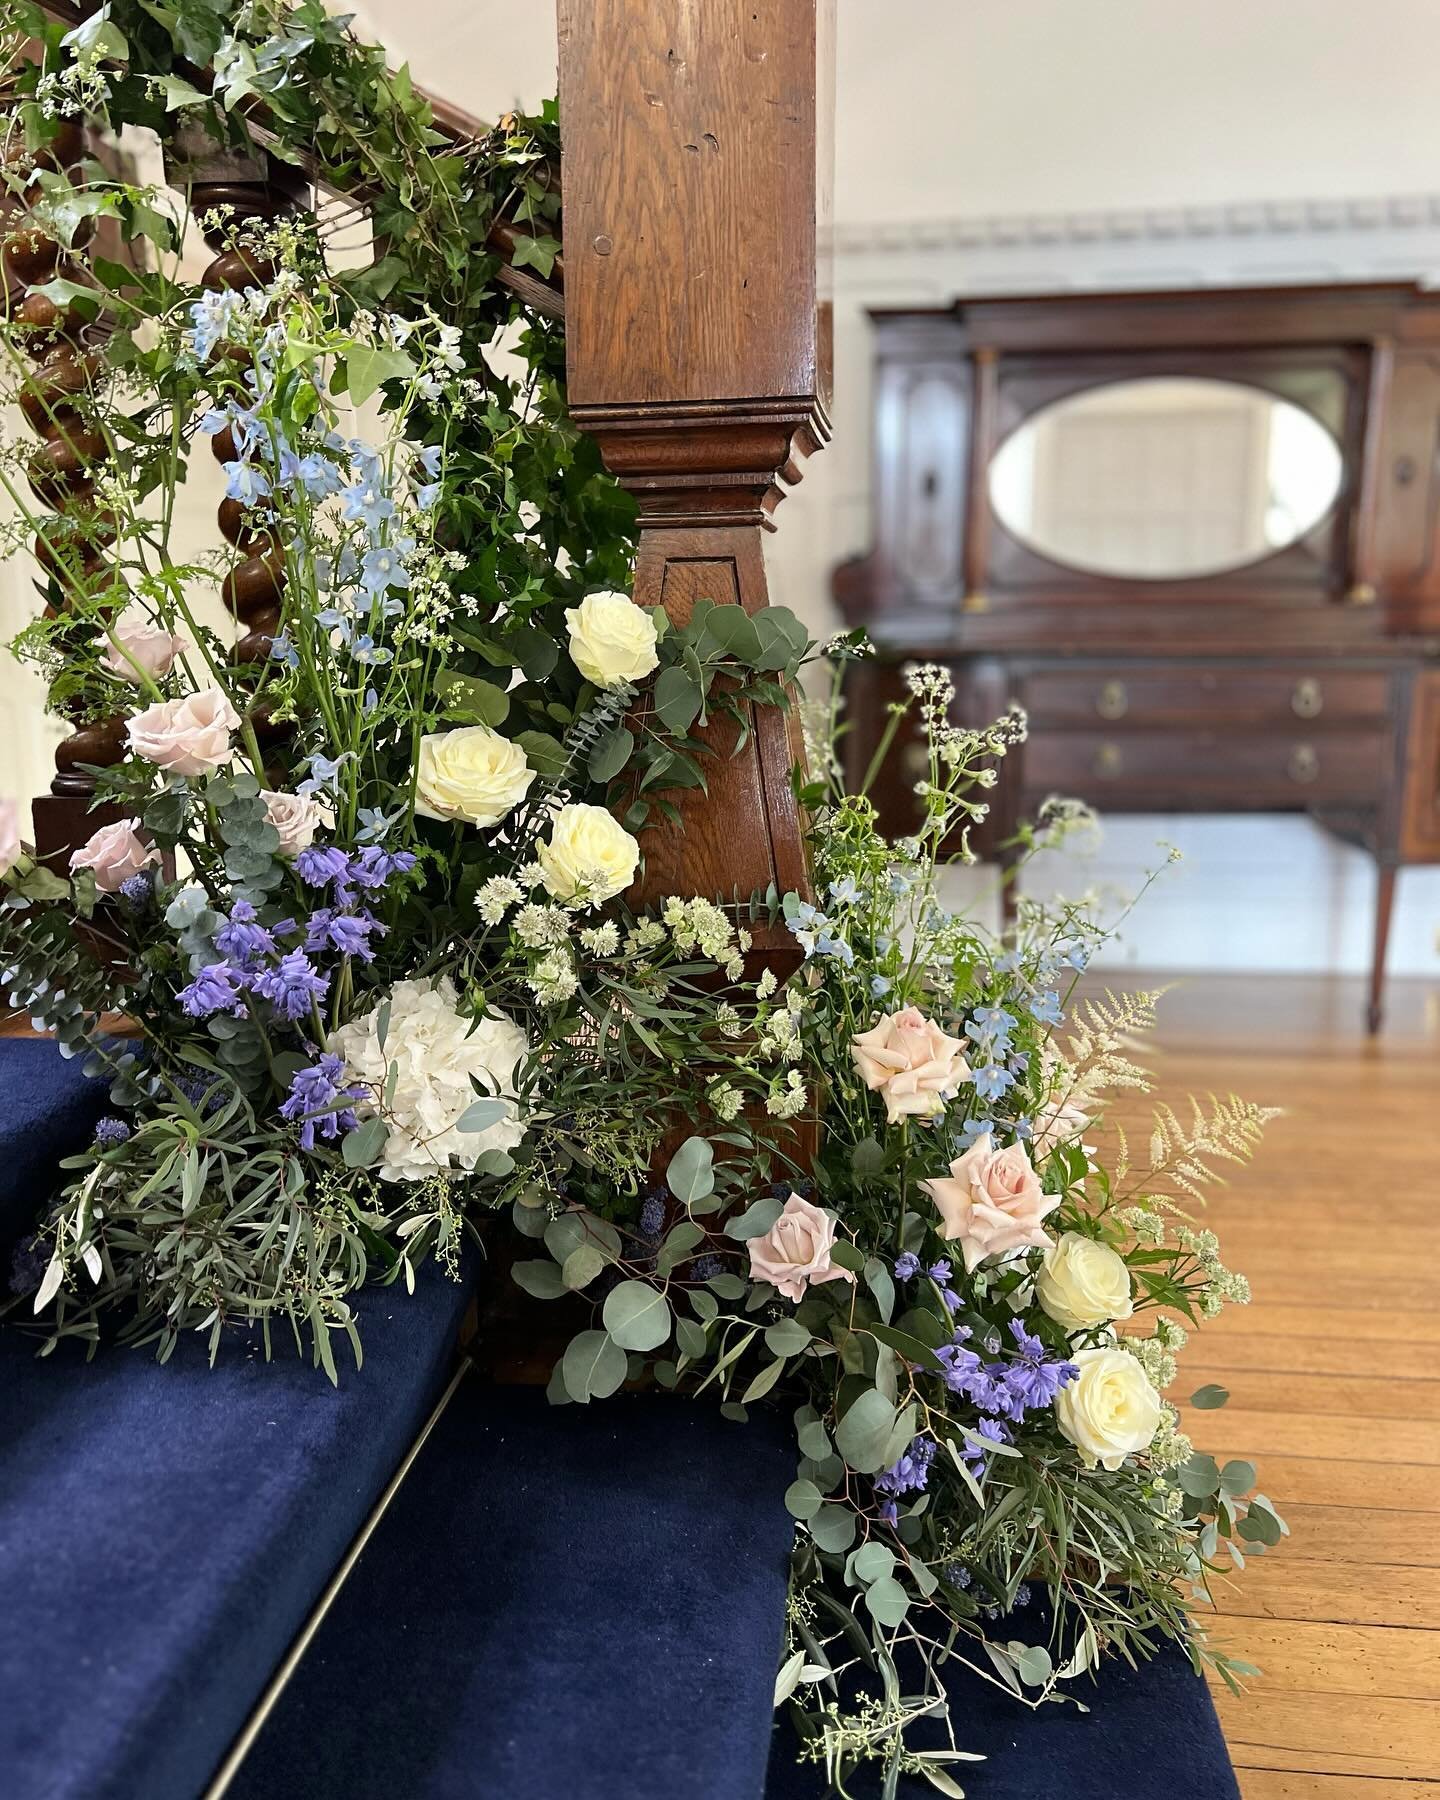 Meadow details @highley_manor_sussex 
.
.
.
.
.
.
#surreyflowers
#surreyflorist
#weddingfloristsurrey
#weddingflowerssurrey
#weddingflowerslondon
#weddingfloristlondon
#londonflorist
#surreywedding
#weddingflowers